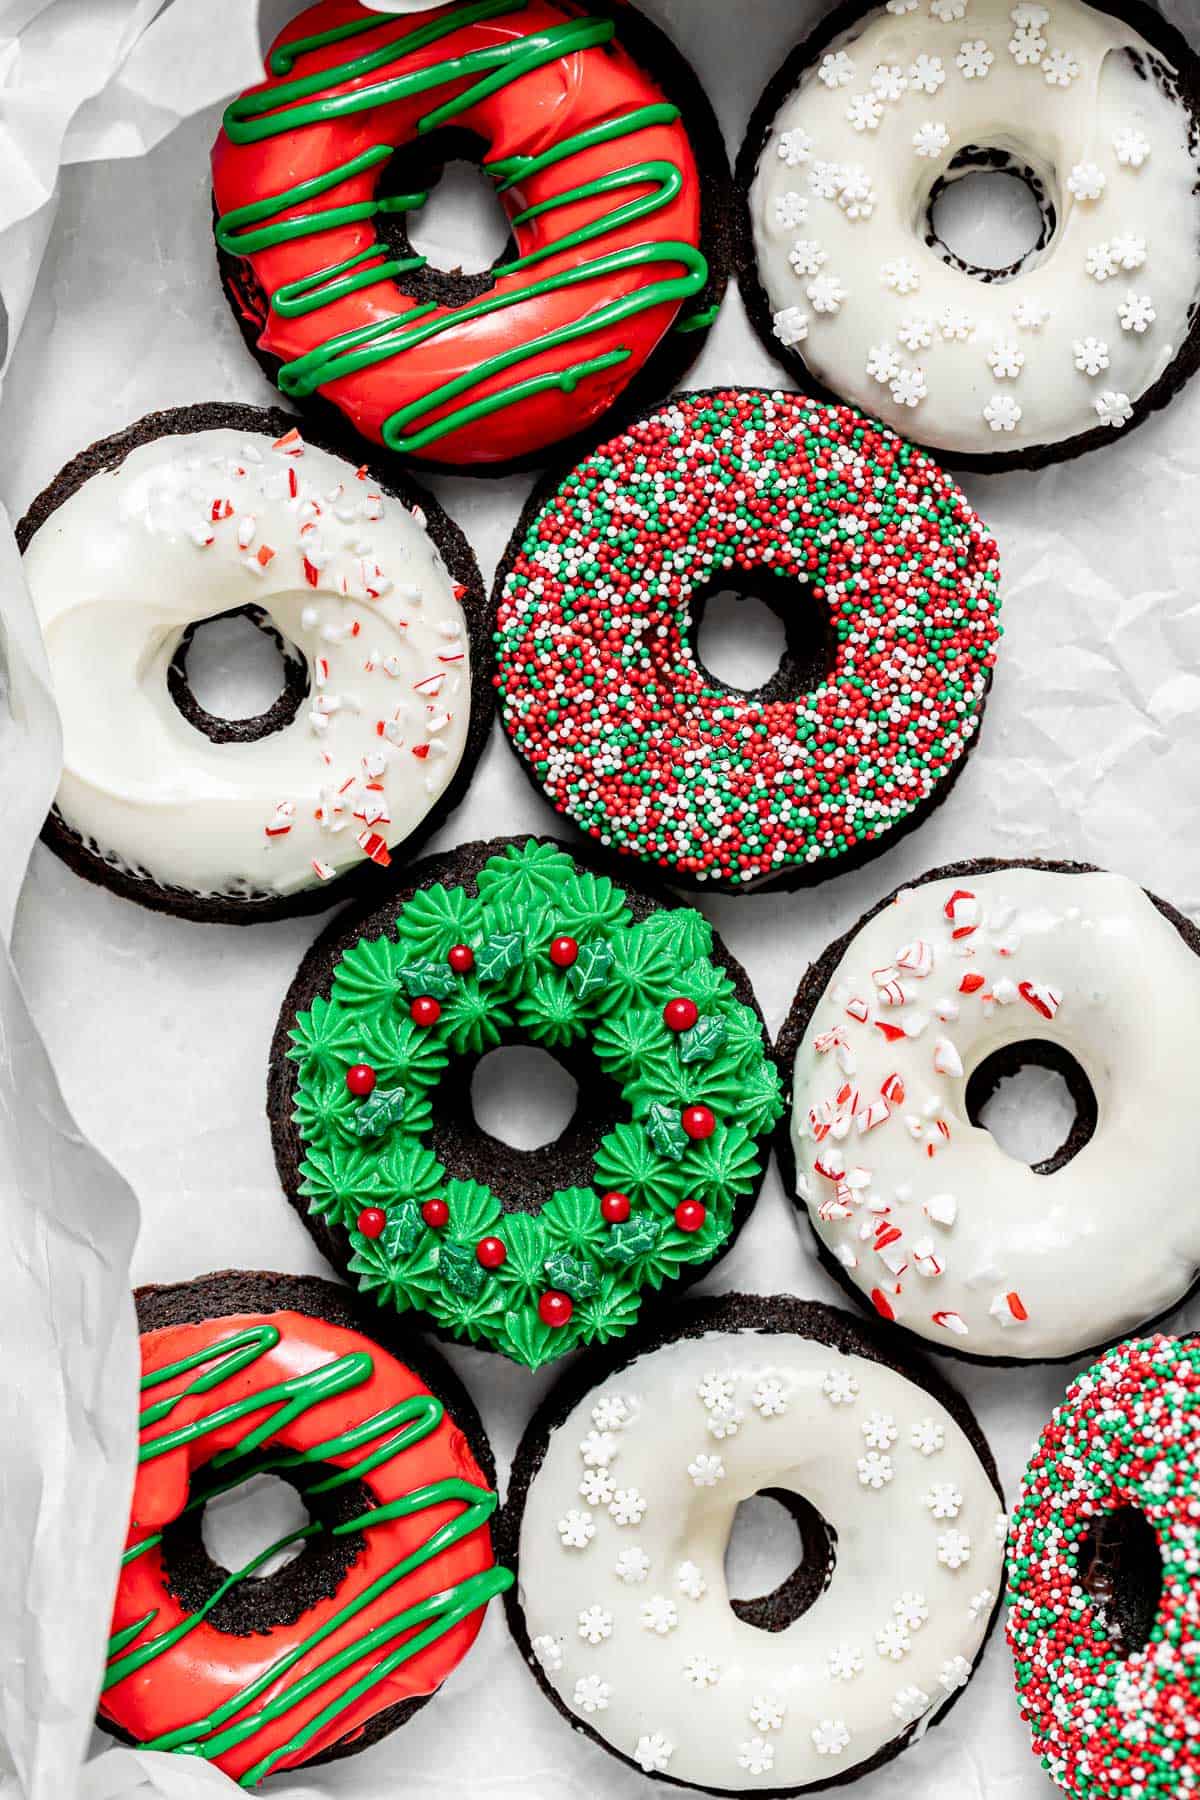 decorated donuts lined up on parchment paper.